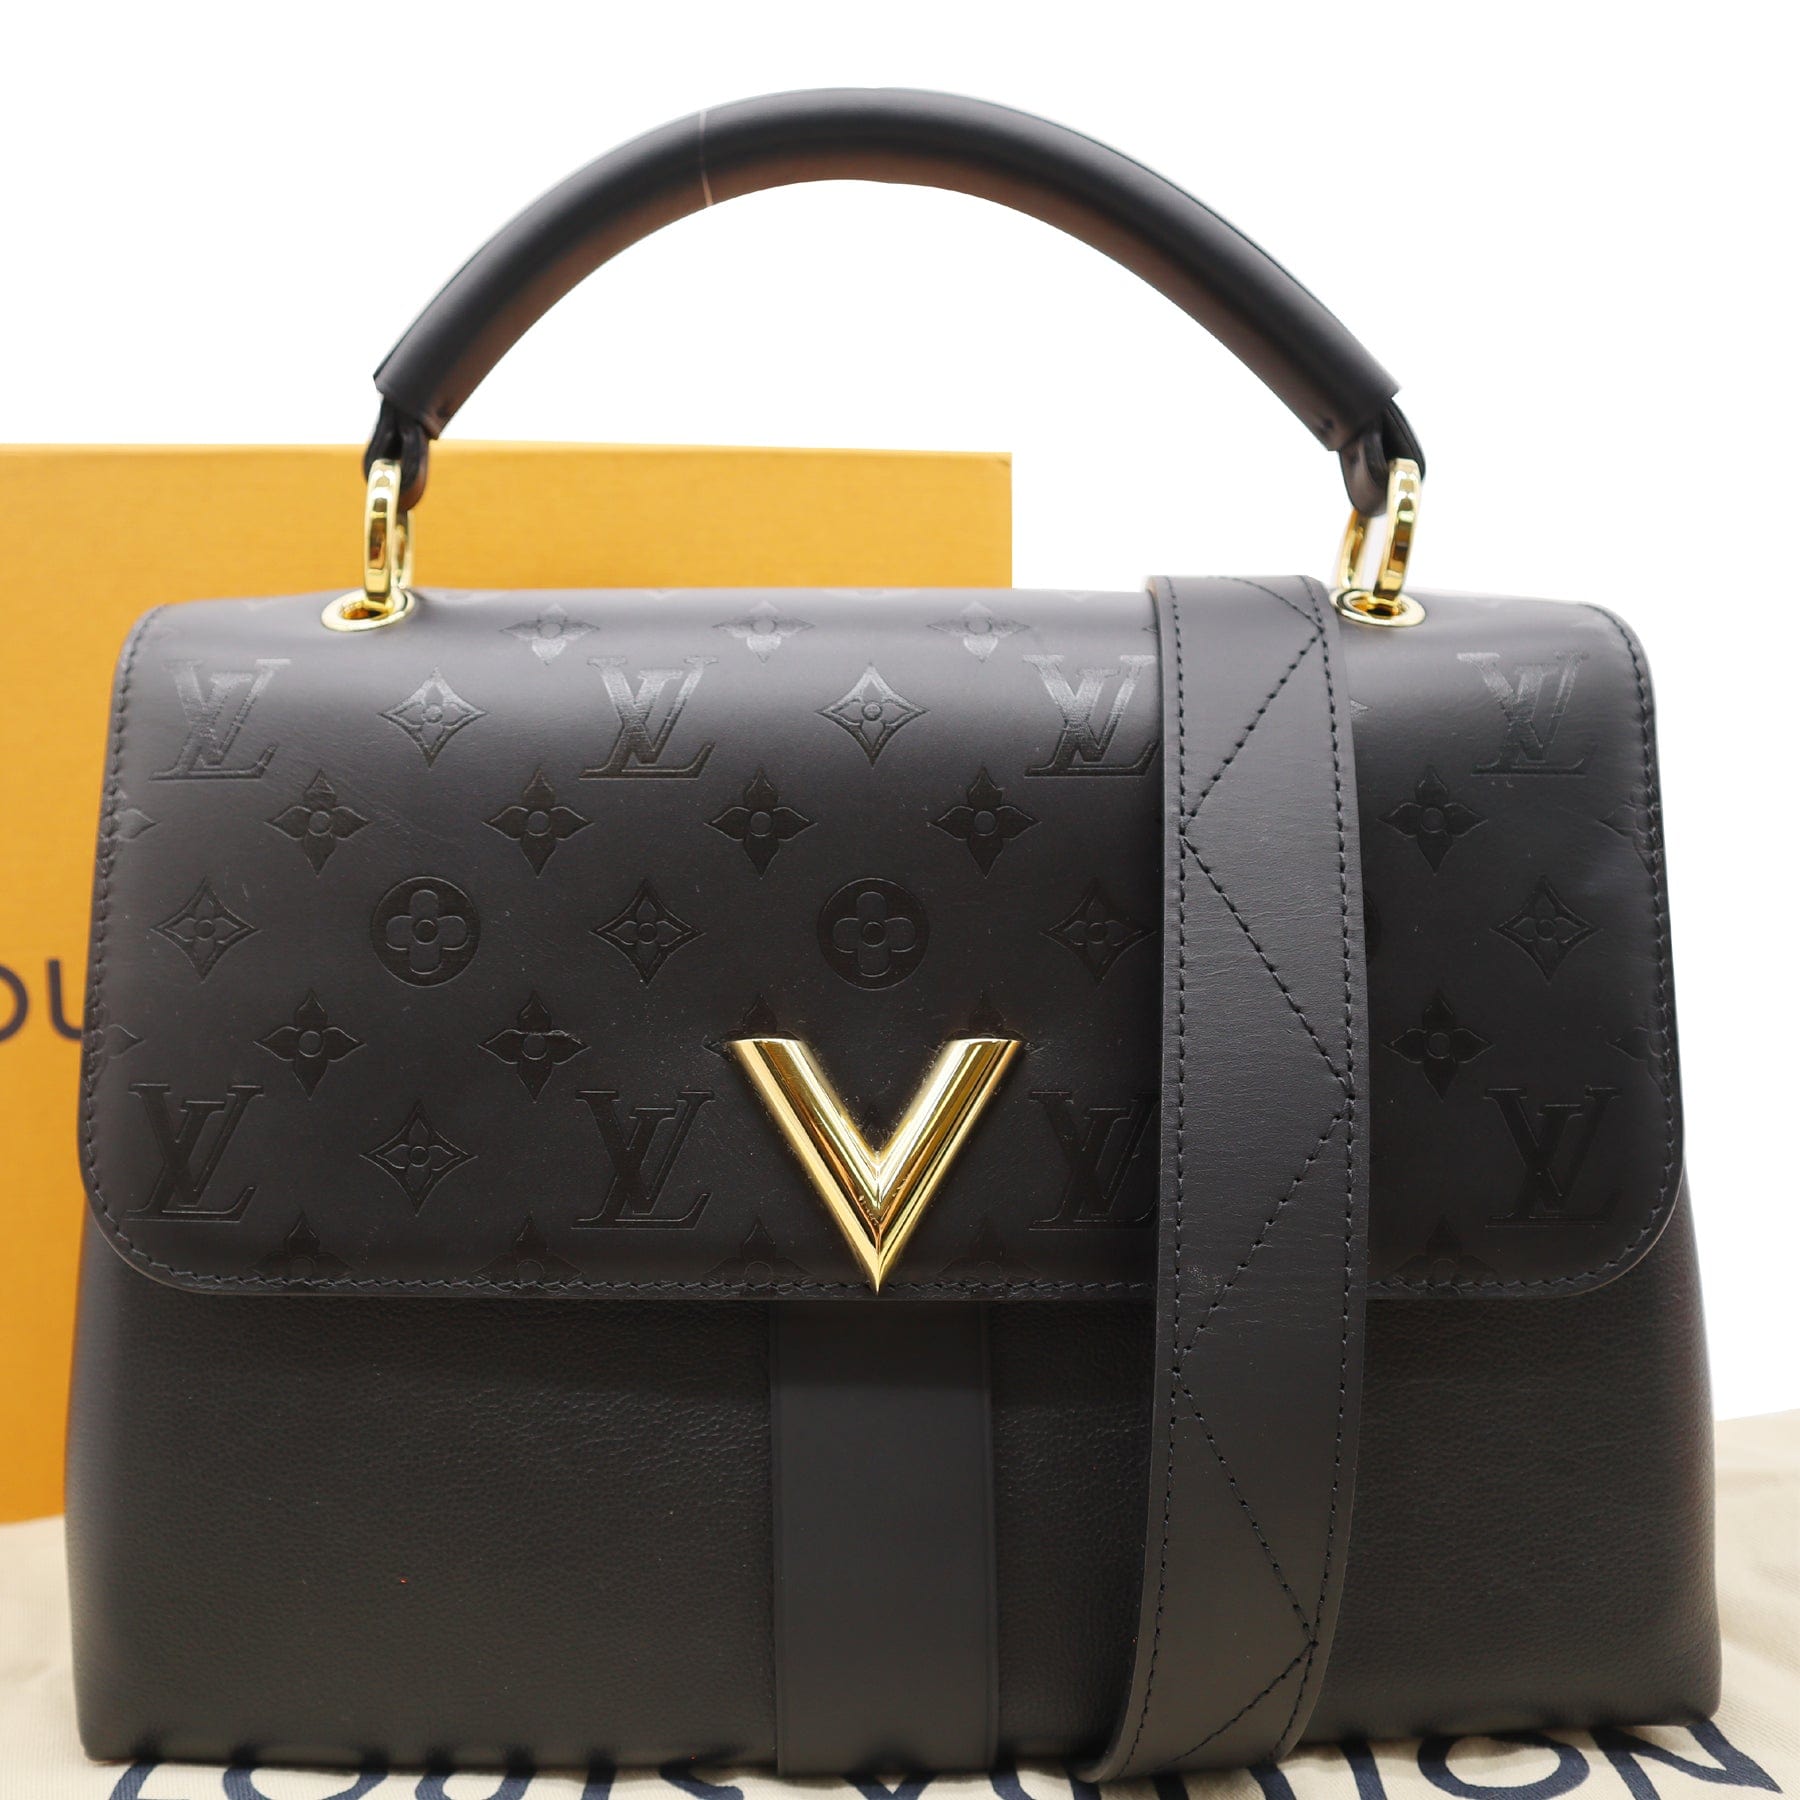 Louis+Vuitton+Very+One+Handle+Top+Handle+Bag+Black+Leather for sale online